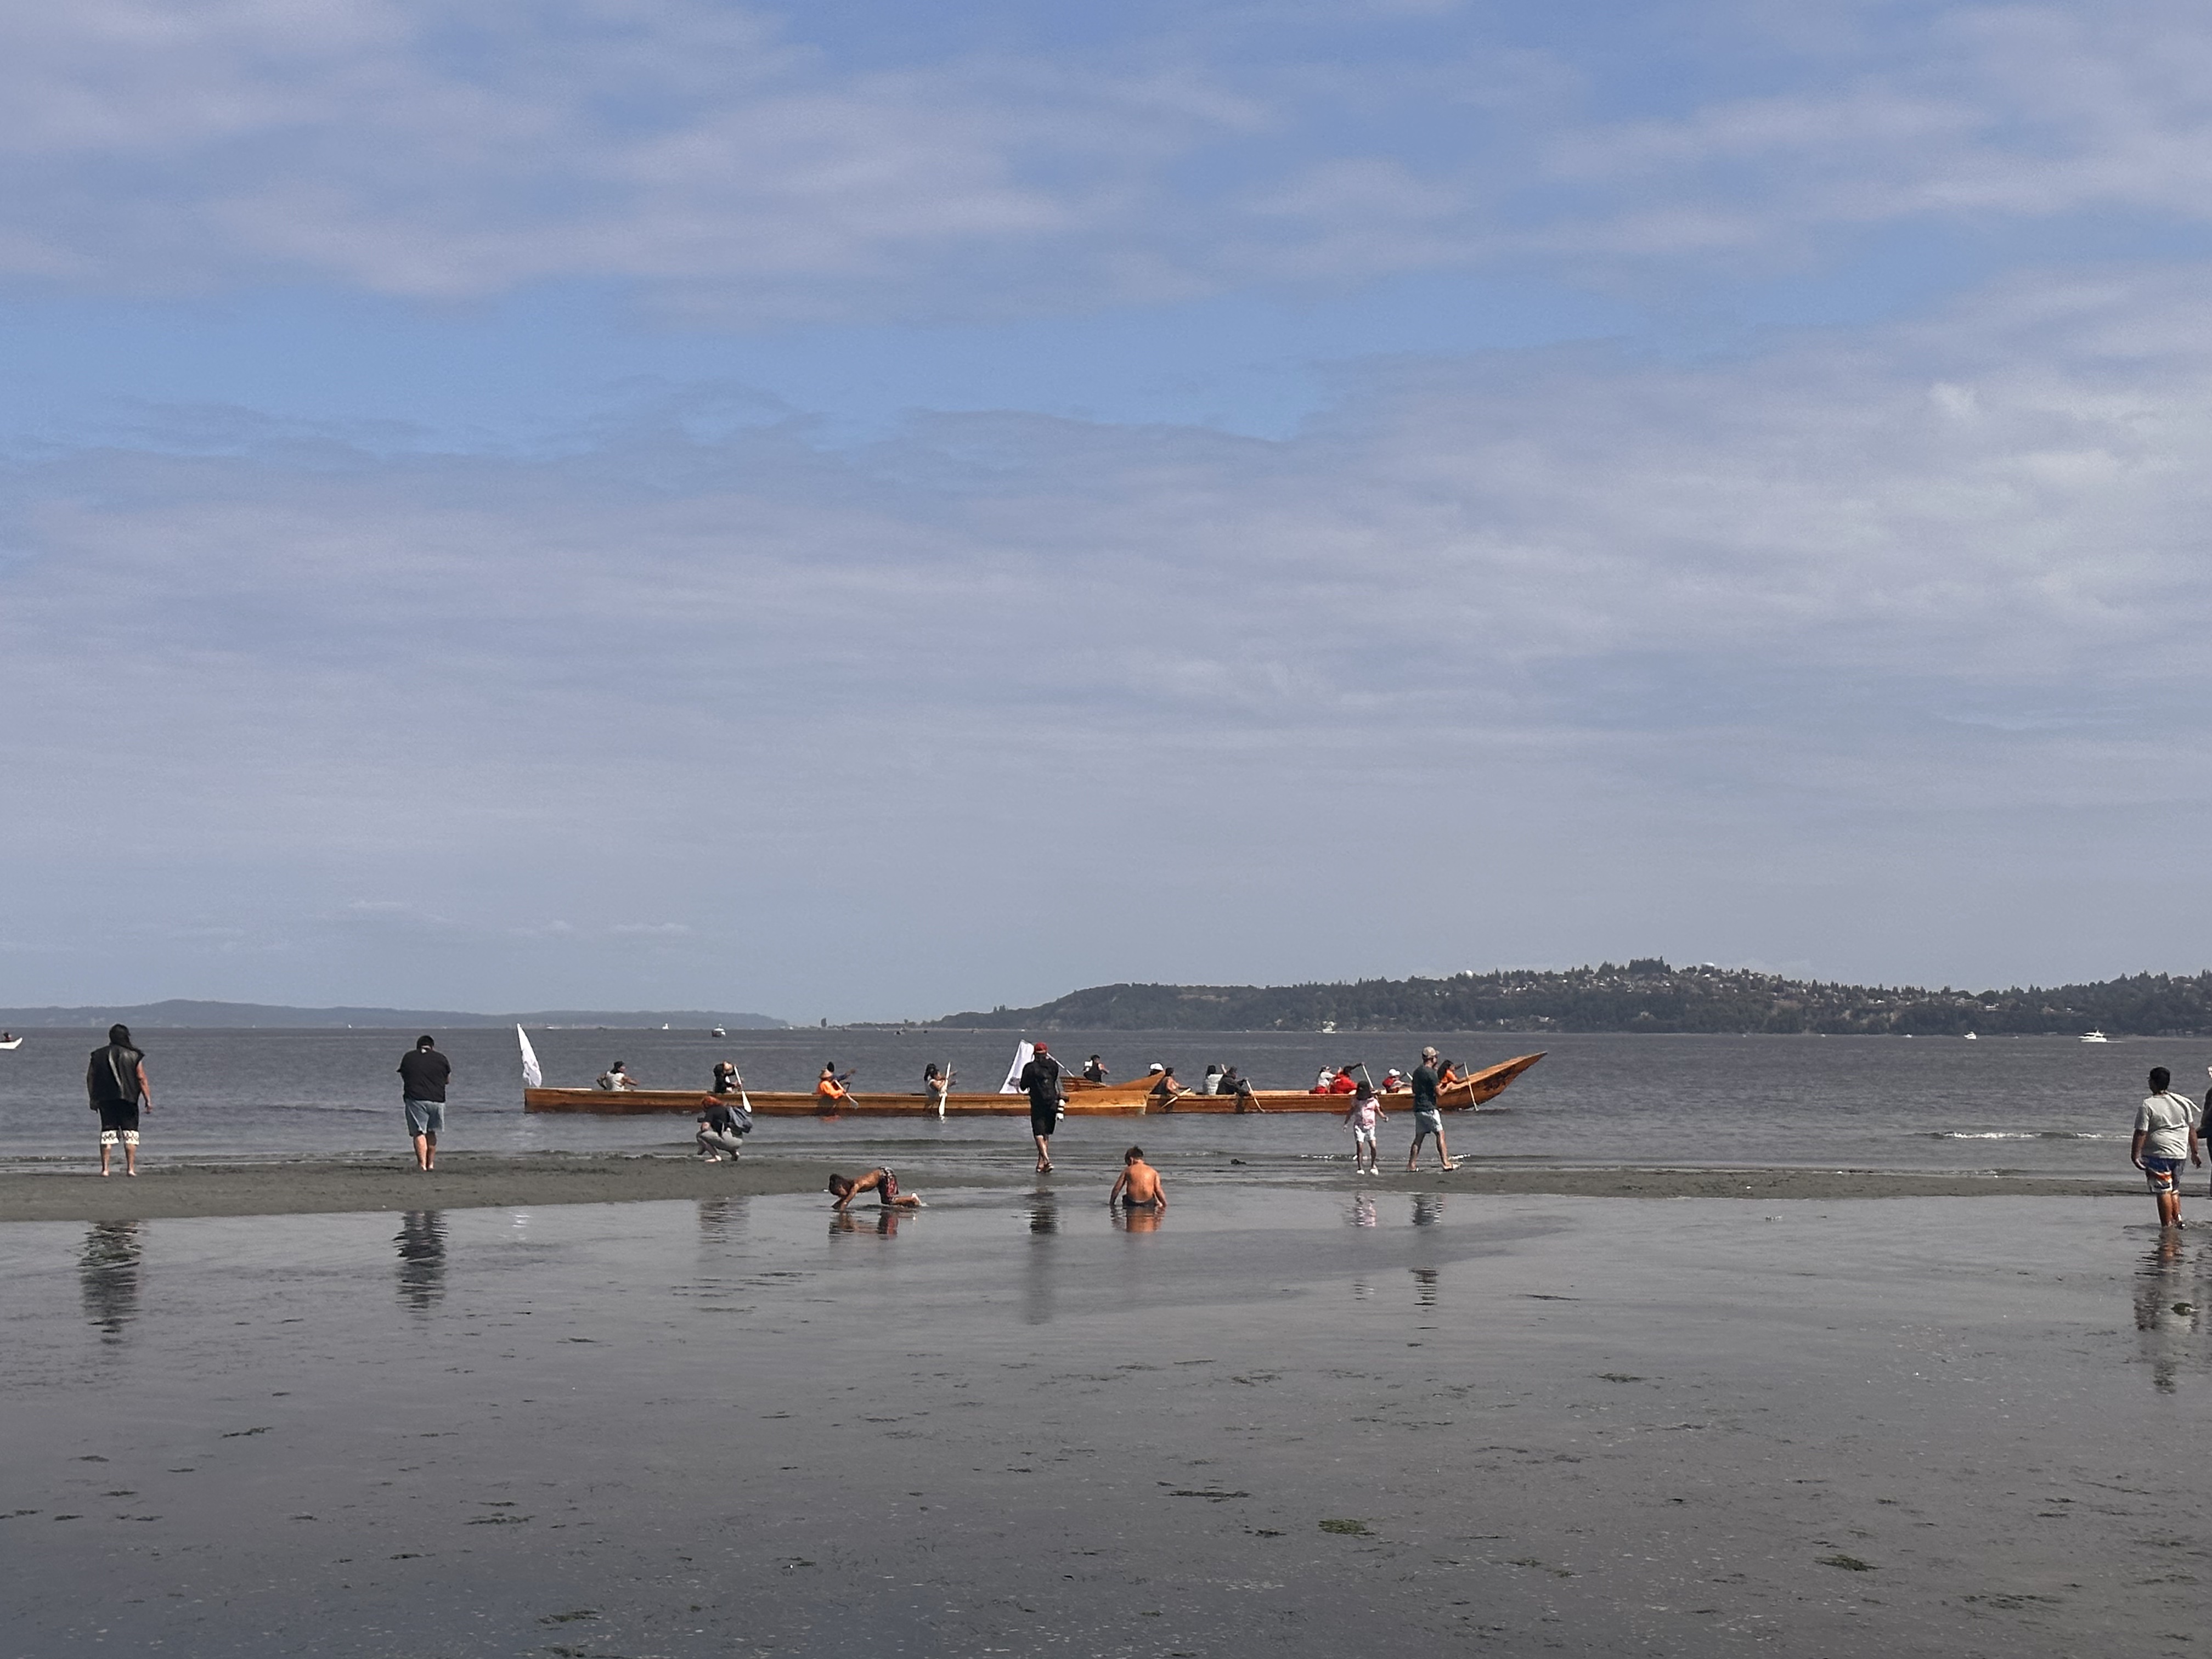 A moment of stillness and quite as one canoe paddles in at Alki Beach. // CREDIT: Tracci Dial, NWPB